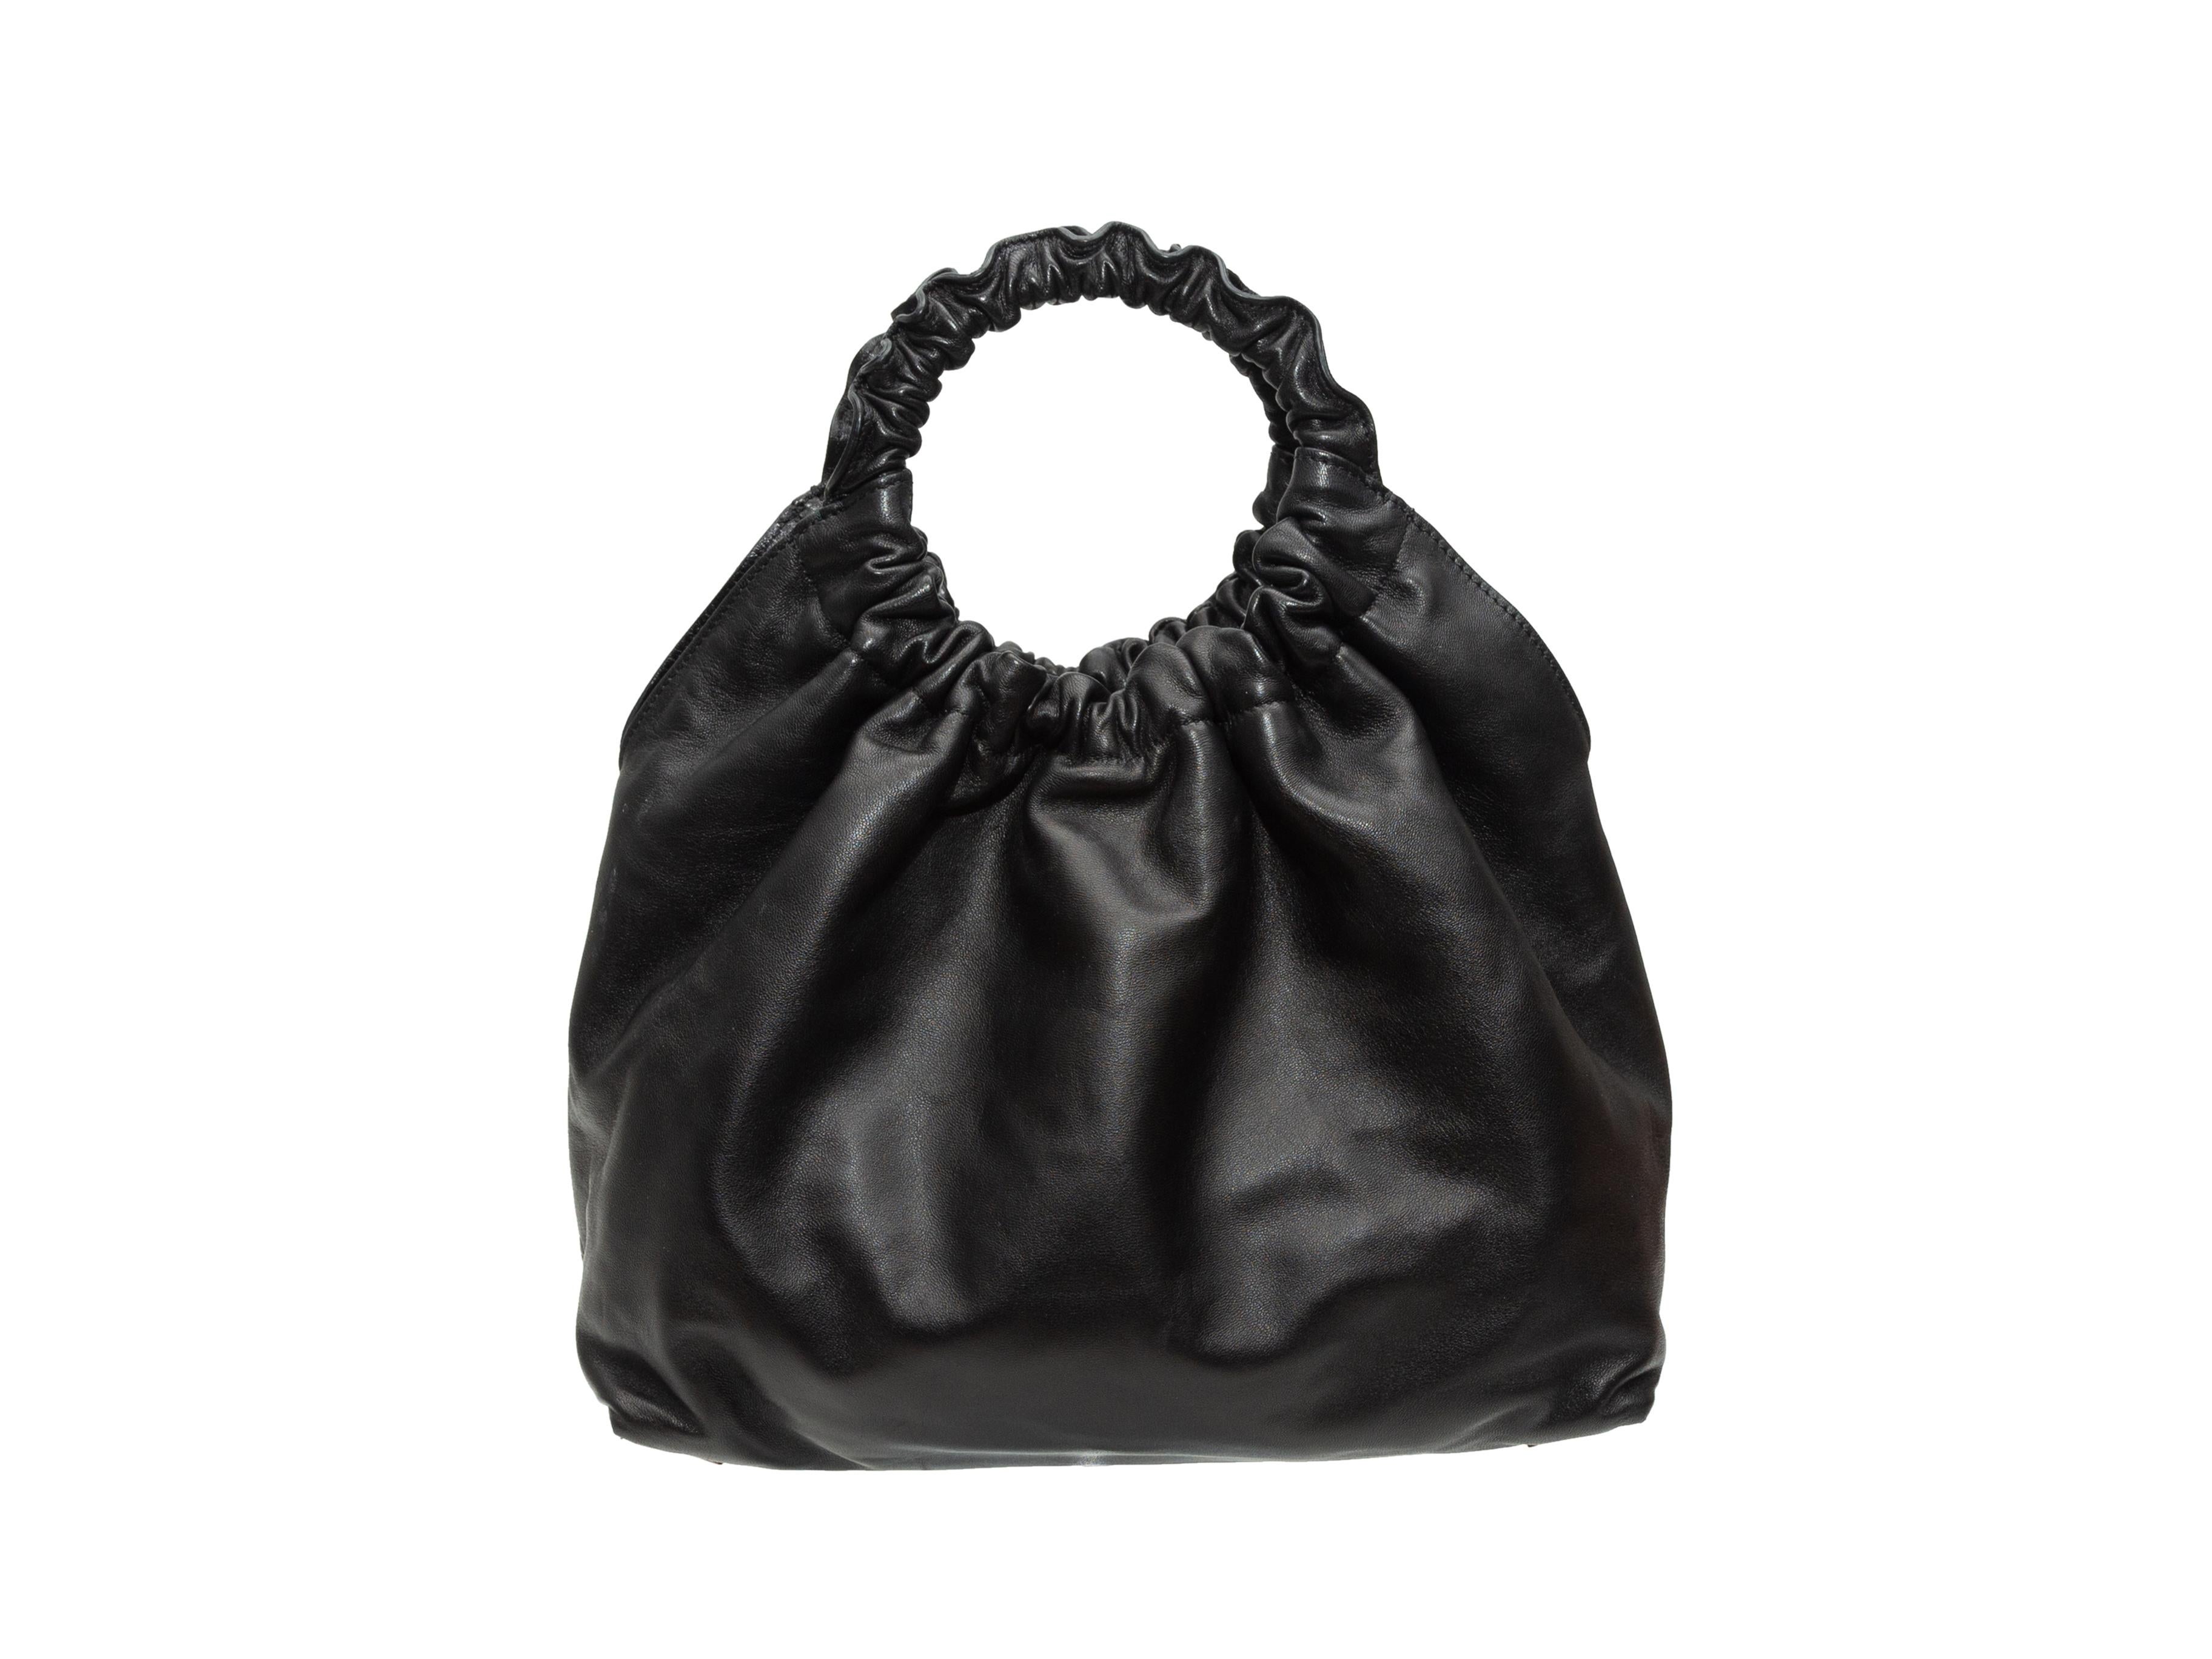 Product details: Black leather small Double Circle bag by The Row. Interior zip pocket. Dual top handles. Optional crossbody strap. Magnetic closure at top. 13